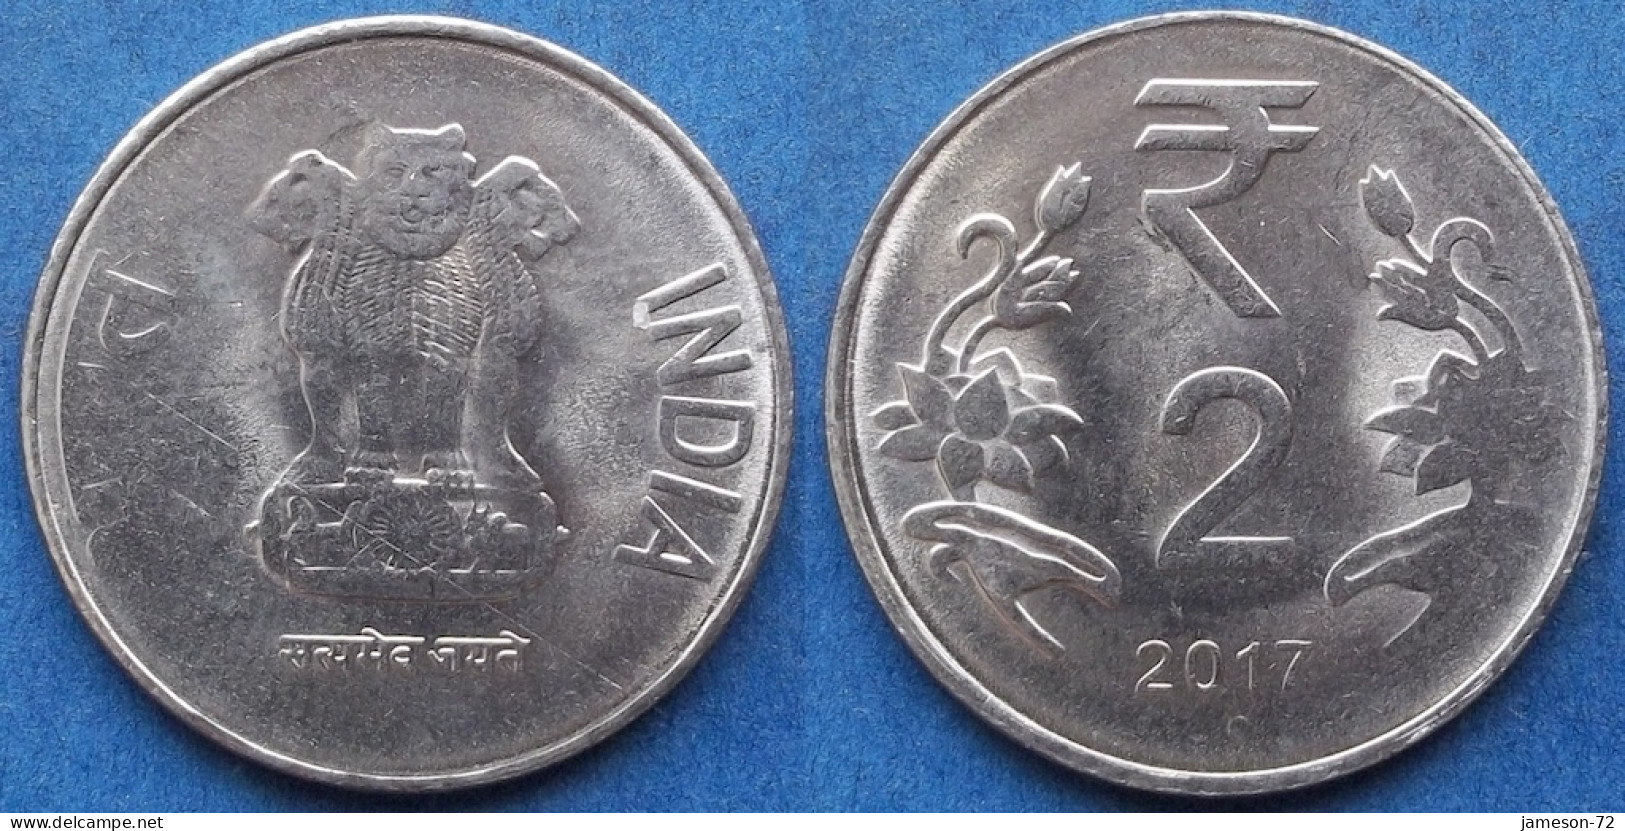 INDIA - 2 Rupees 2017 "Lotus Flowers" KM# 395 Republic Decimal Coinage (1957) - Edelweiss Coins - Georgien